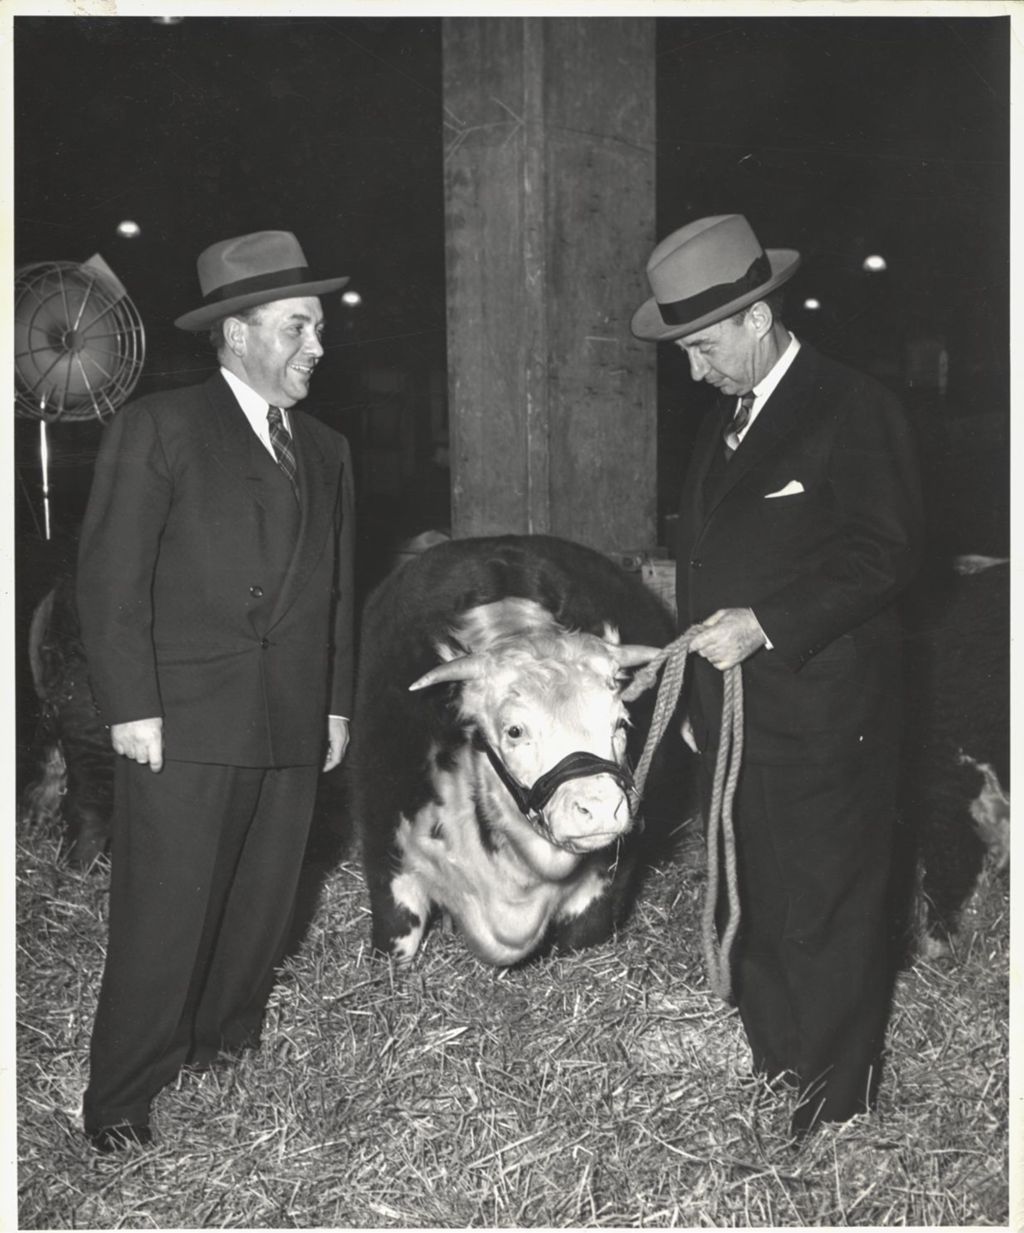 Miniature of Richard J. Daley and Adlai Stevenson review cattle at a stock show